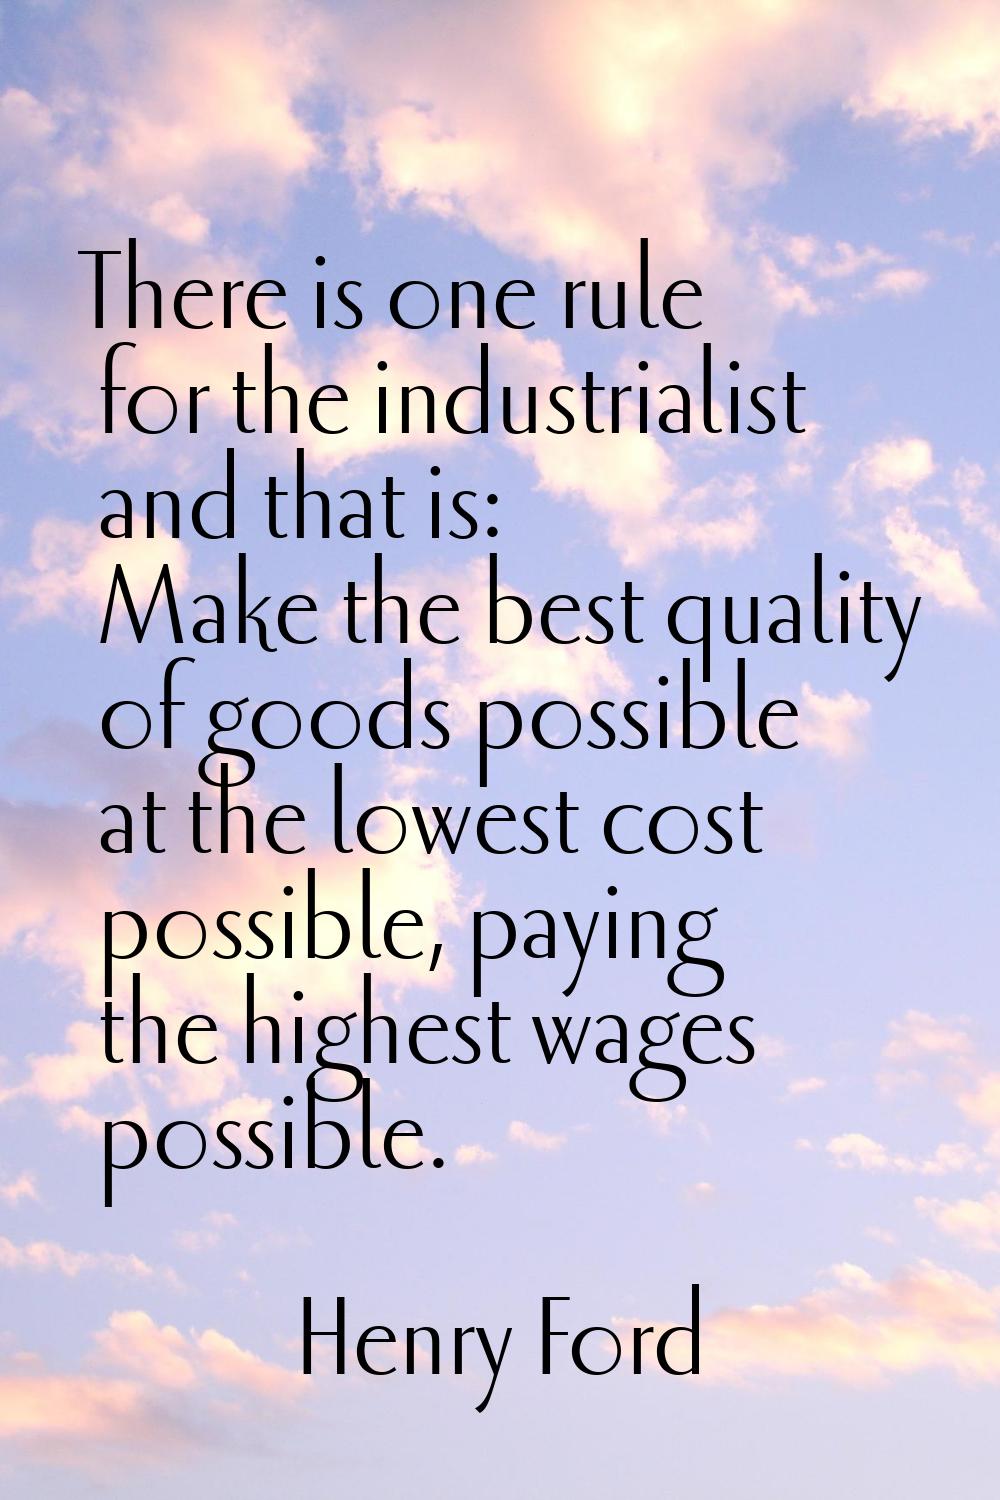 There is one rule for the industrialist and that is: Make the best quality of goods possible at the